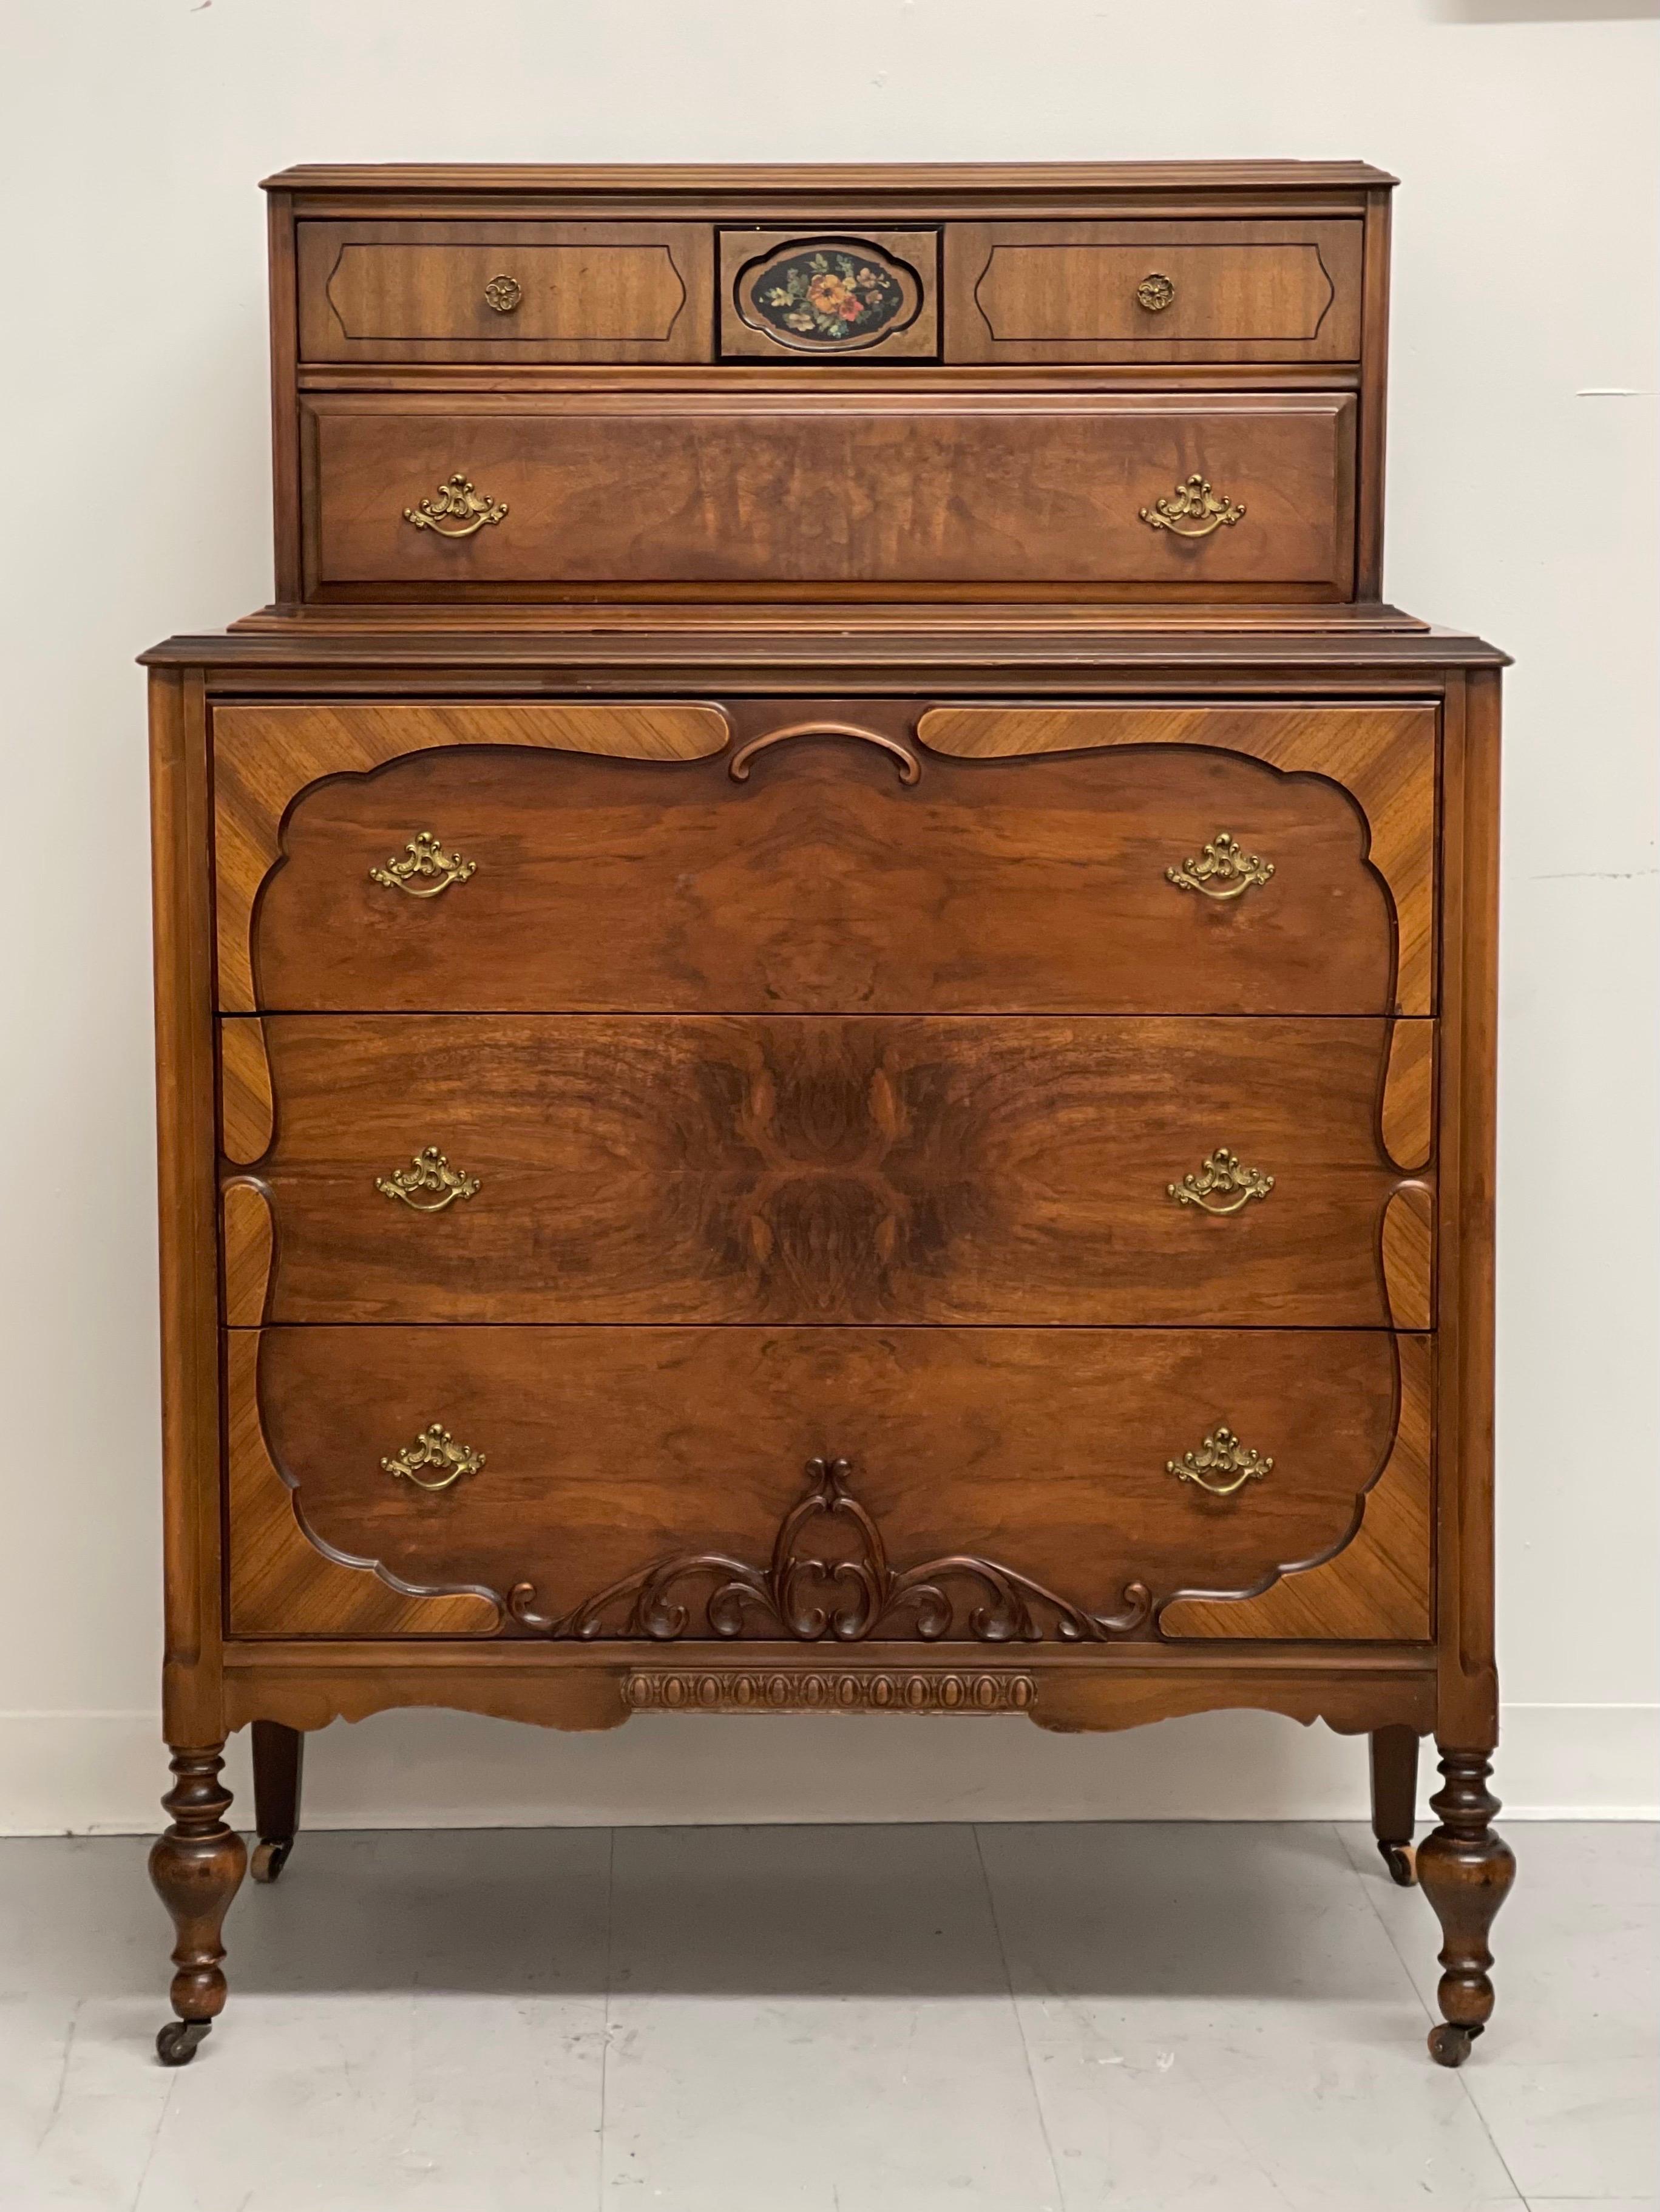 Victorian style dresser with original hardware. Dovetail drawers hand painted motif.

Dimensions. 38 W ; 19 D ; 54 1/2 H.